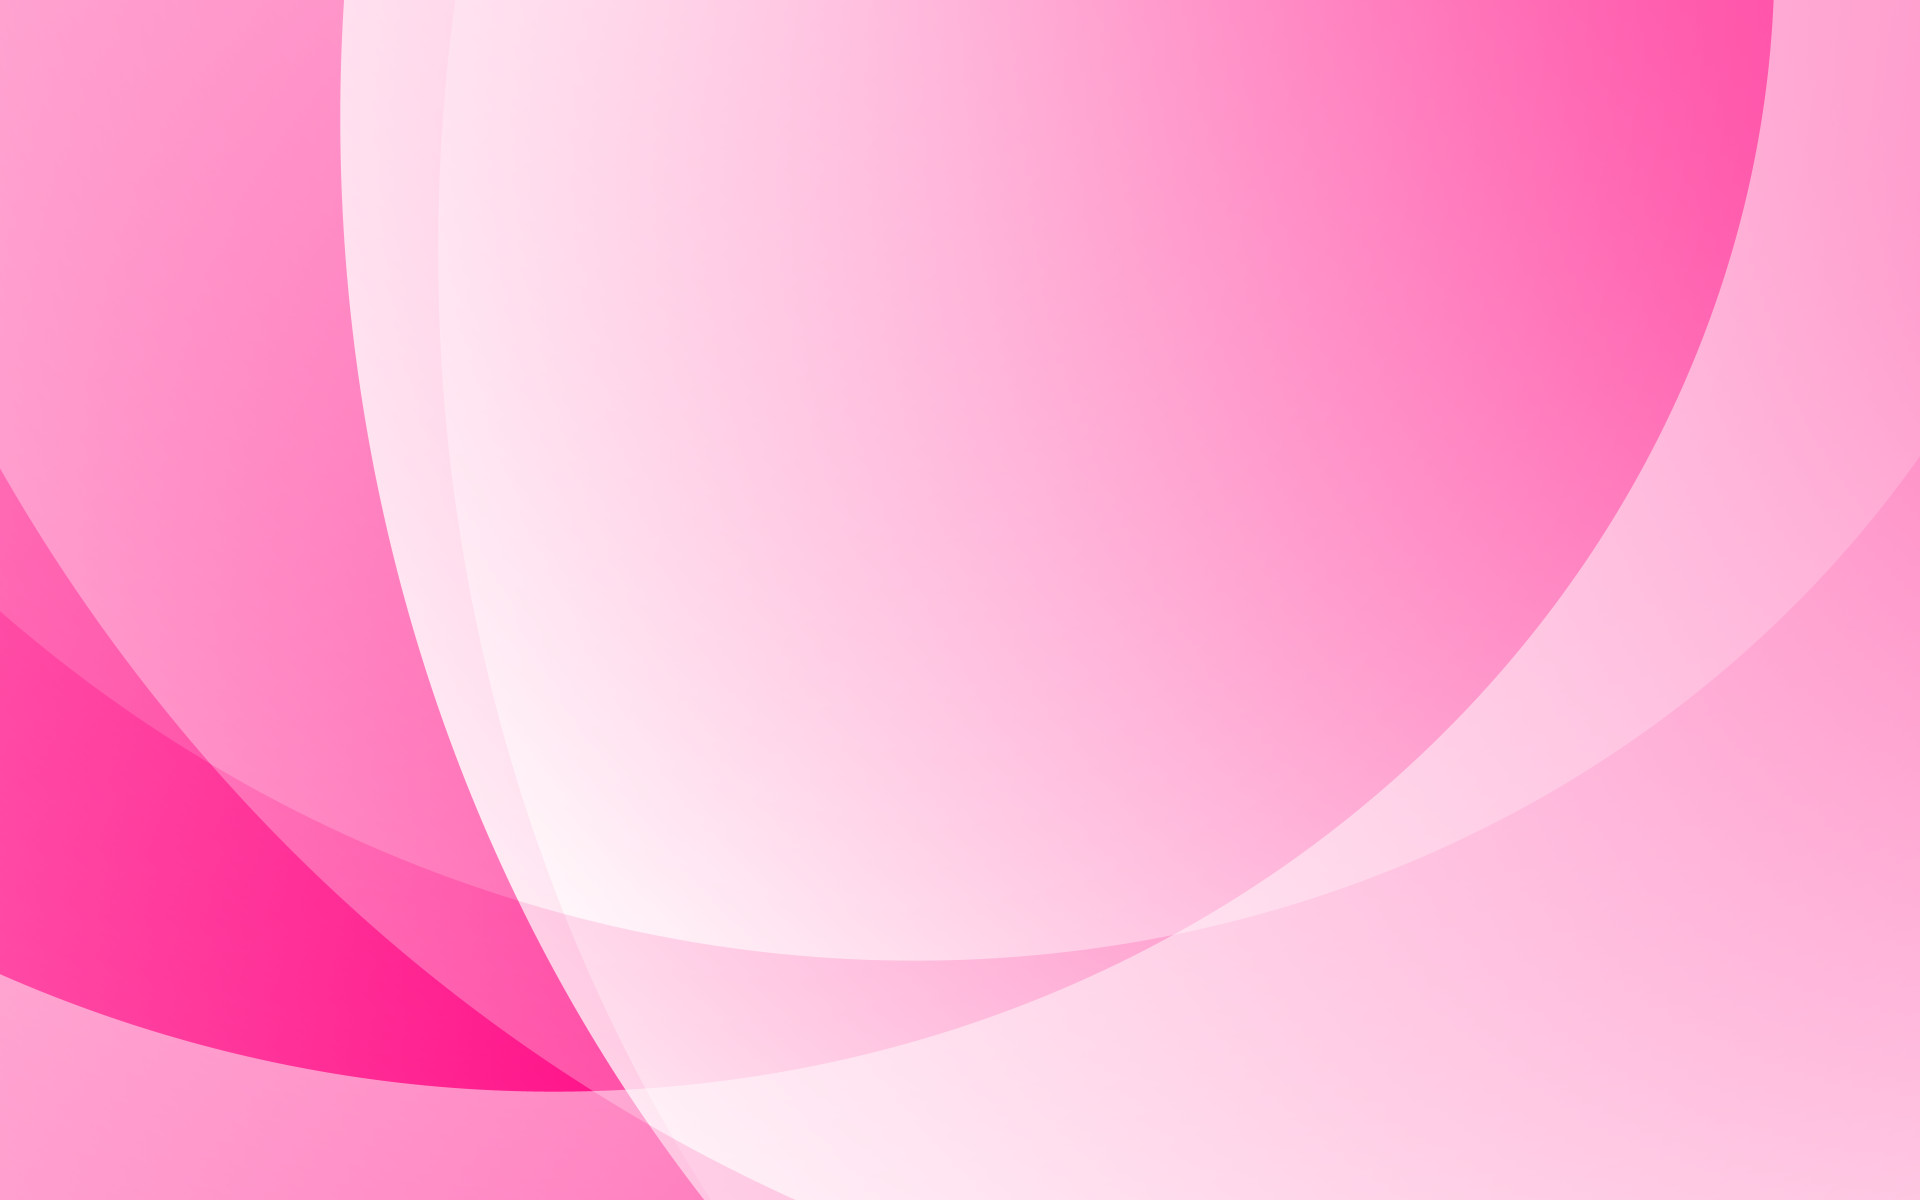 A Very Pink Abstract Wallpaper by foxhead128 on DeviantArt